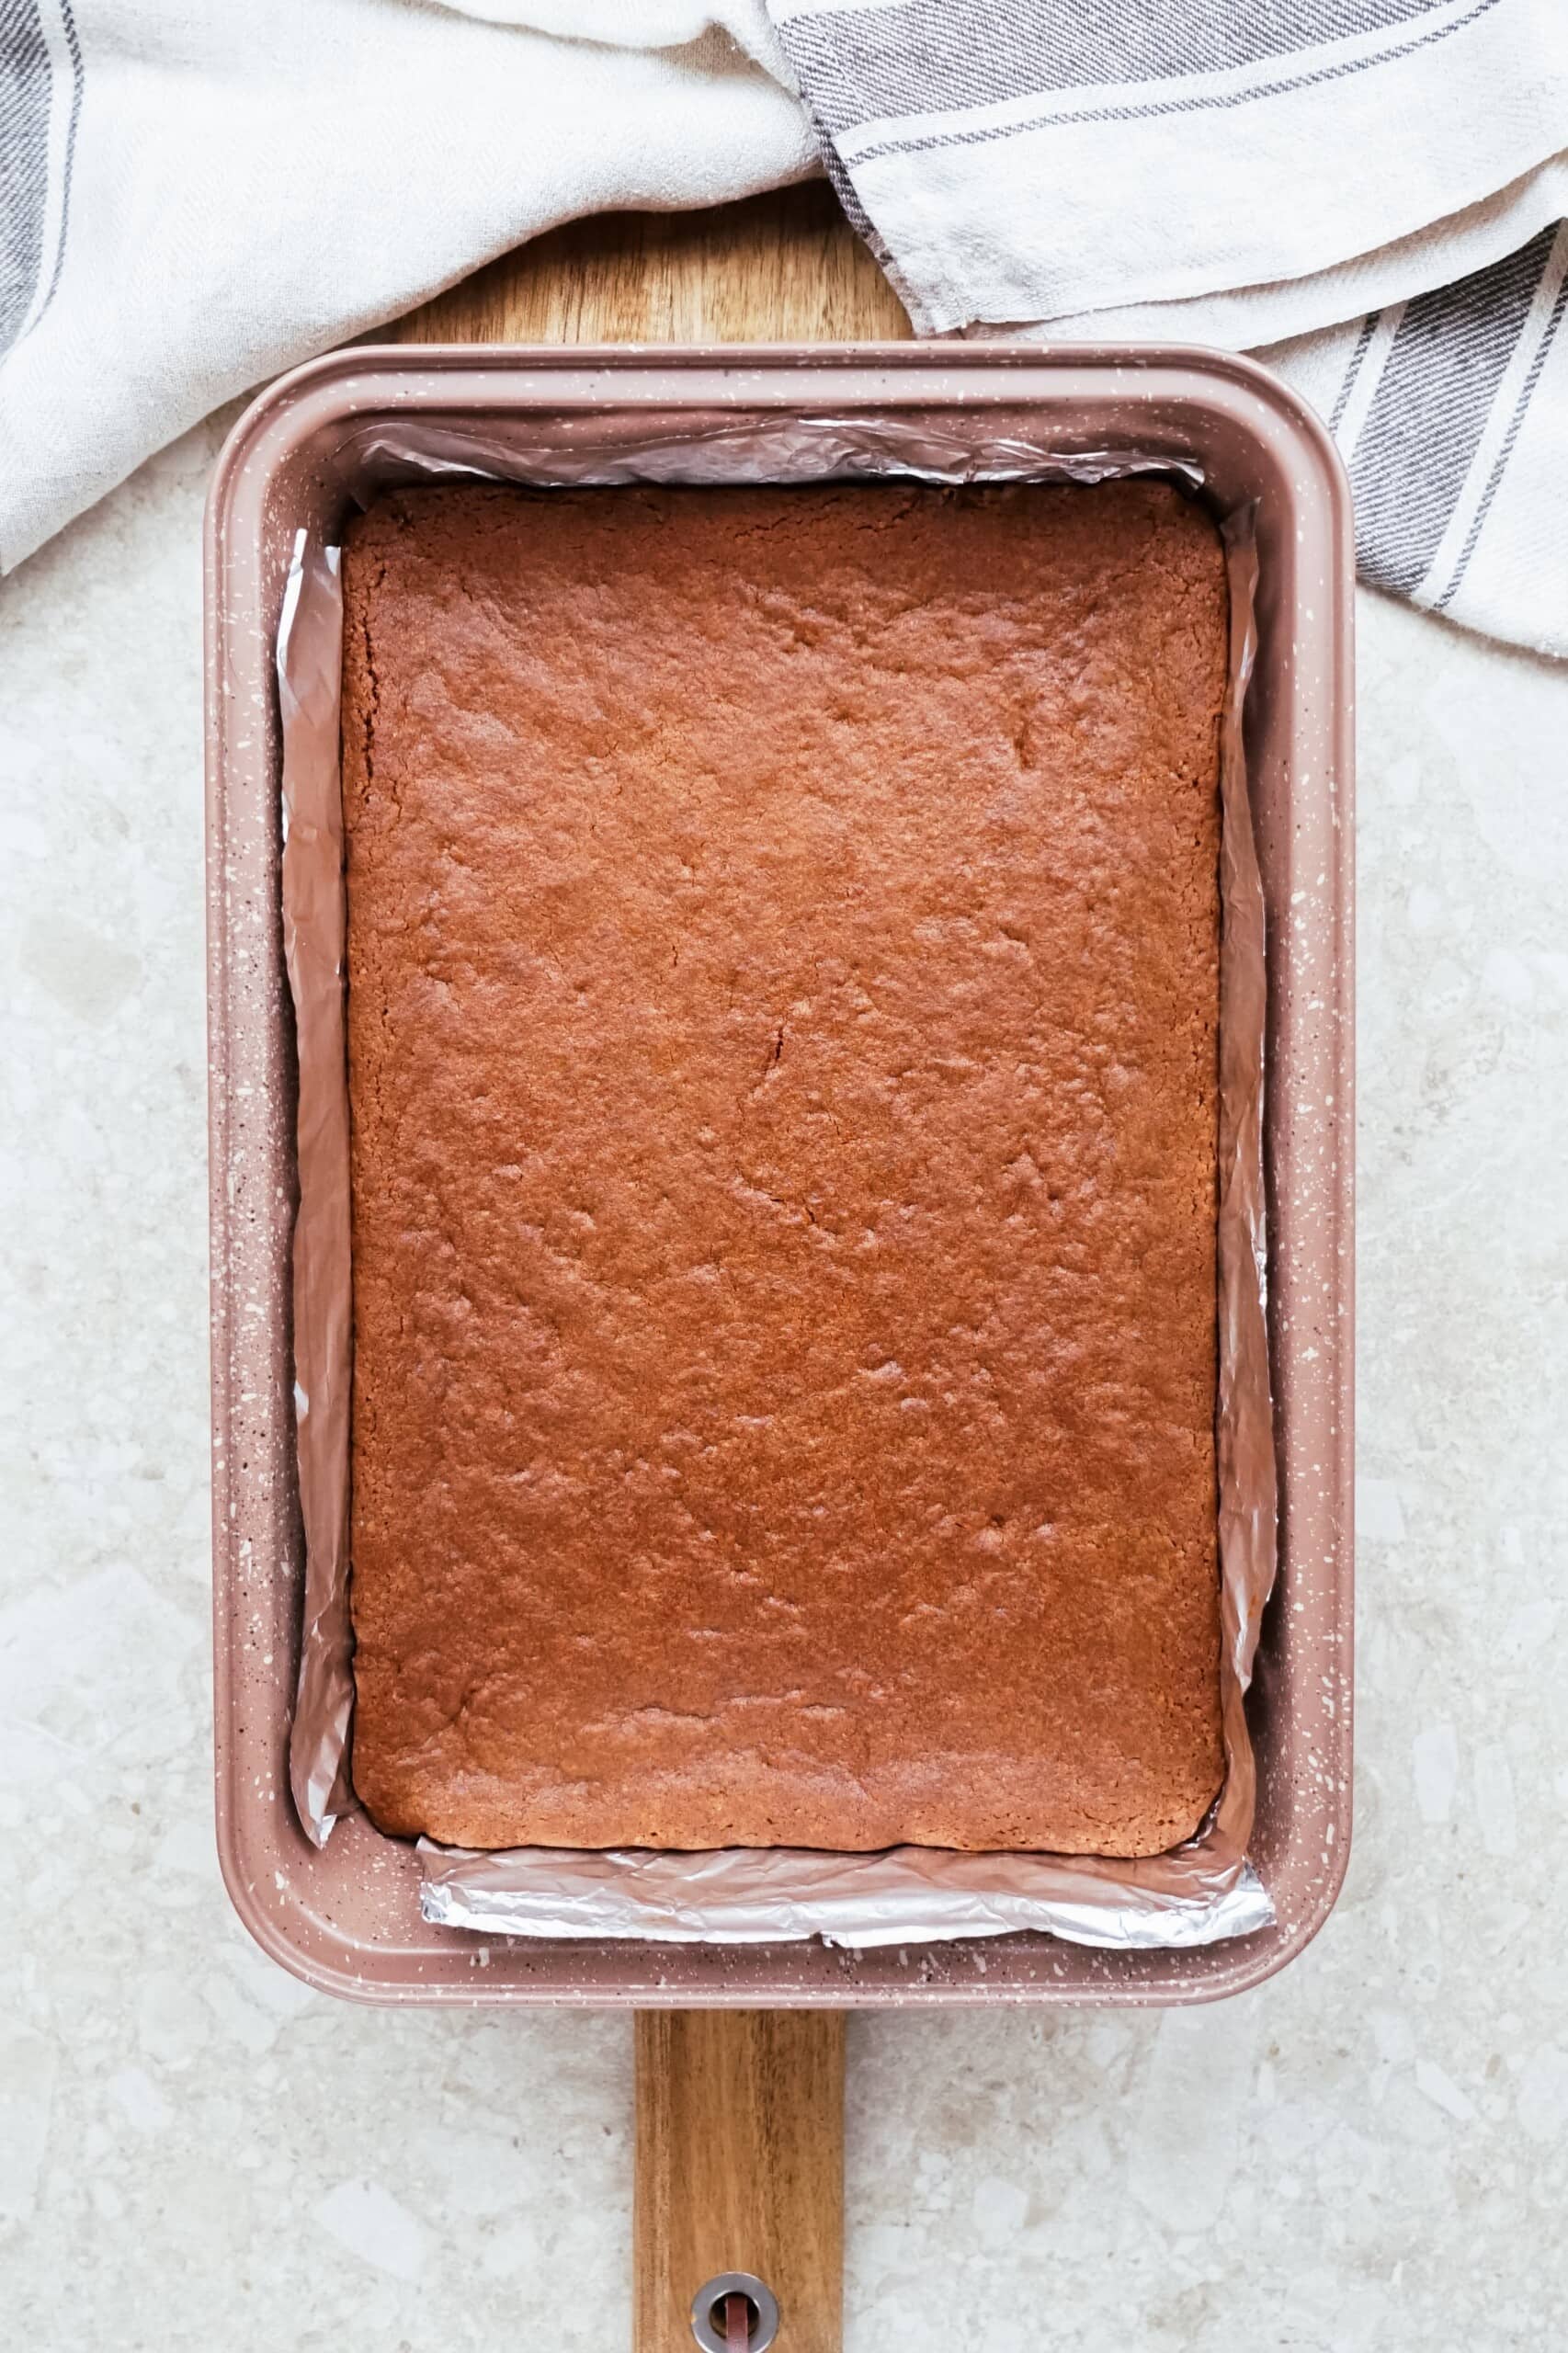 baked gingerbread bars in pan